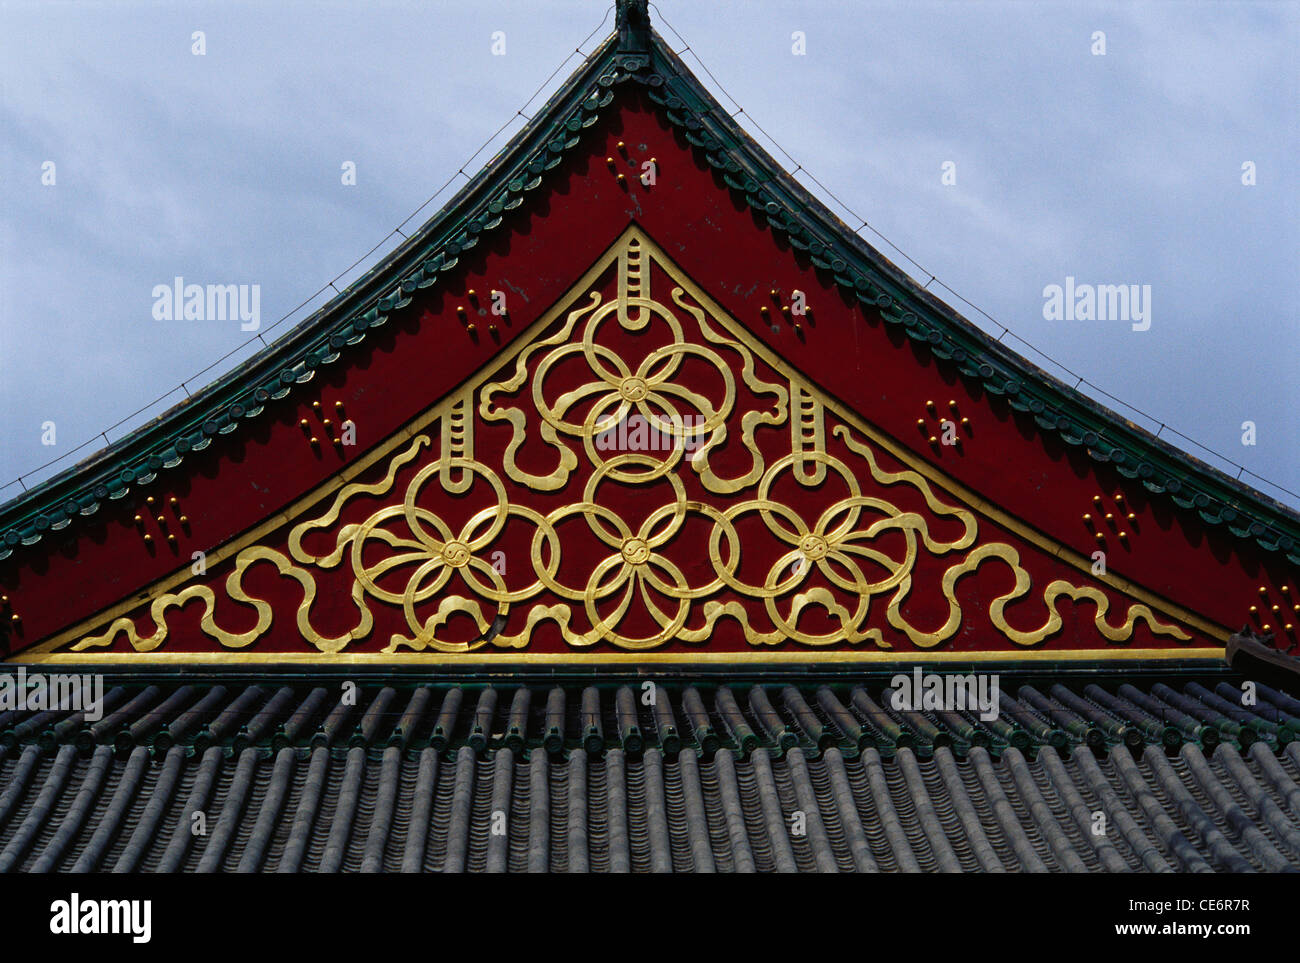 Design on roof ; National Museum of China ; Beijing ; China ; Asia Stock Photo